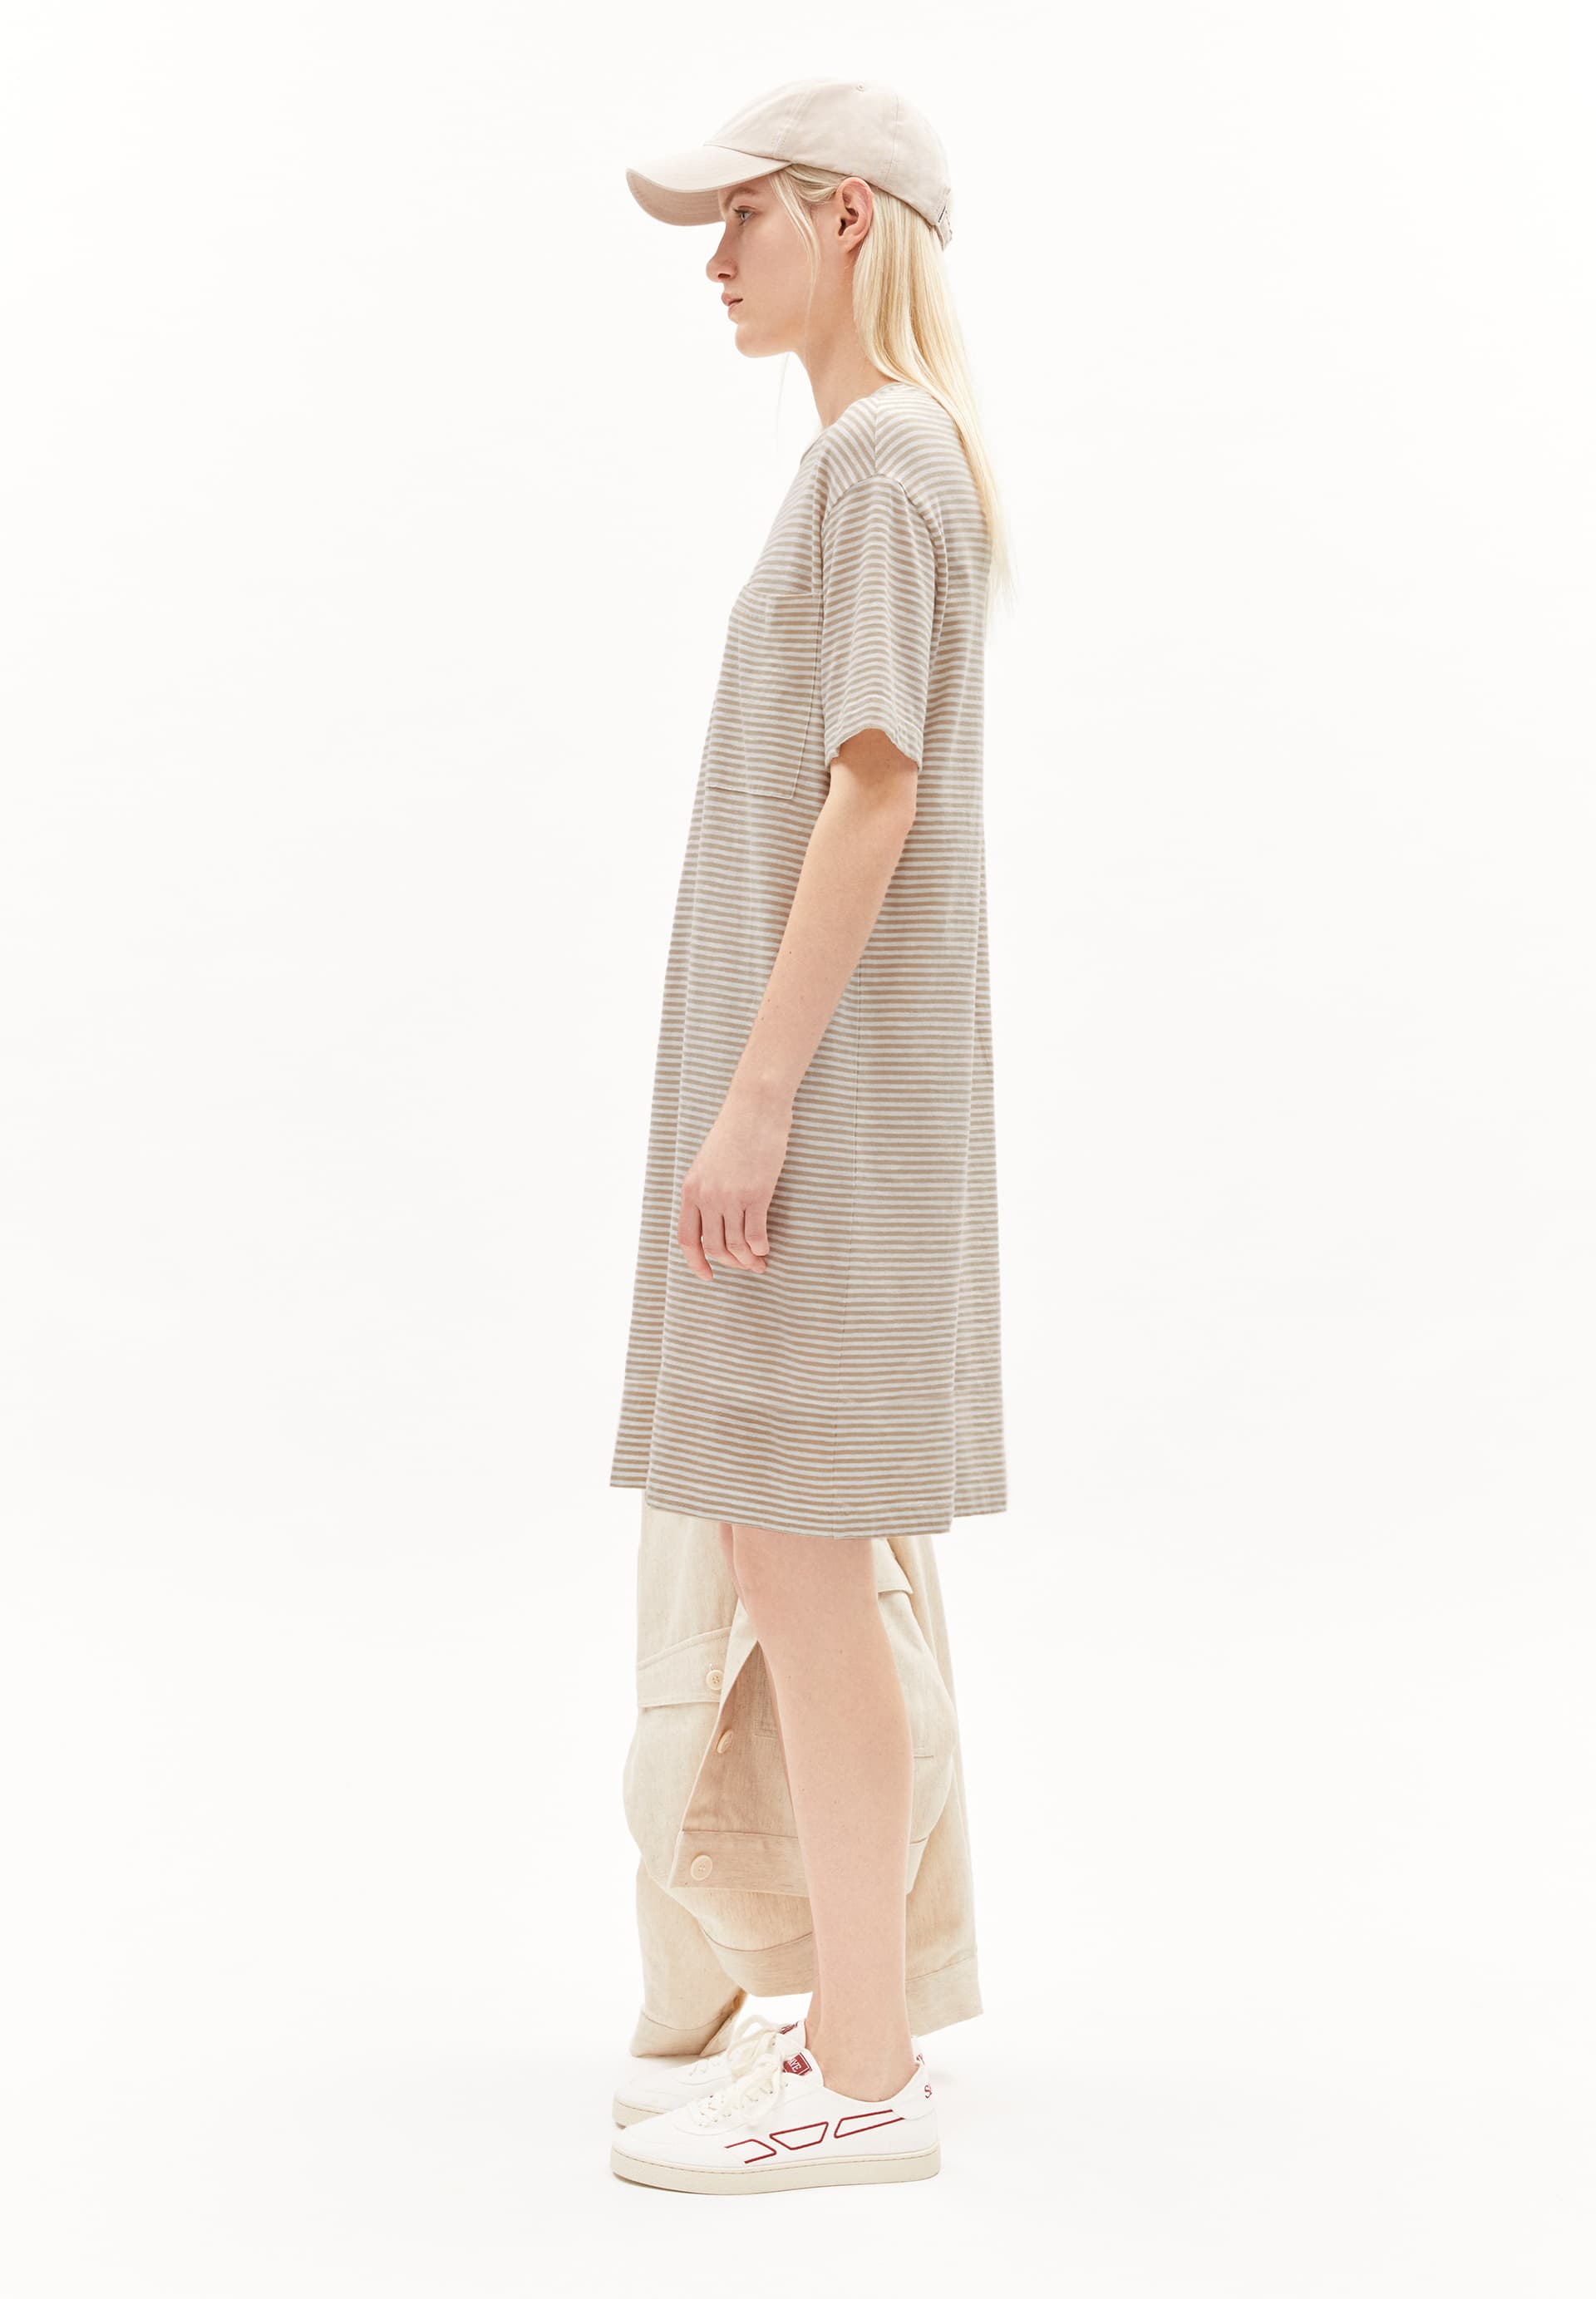 CHAARA LOVELY STRIPES Jersey Dress Relaxed Fit made of Organic Cotton